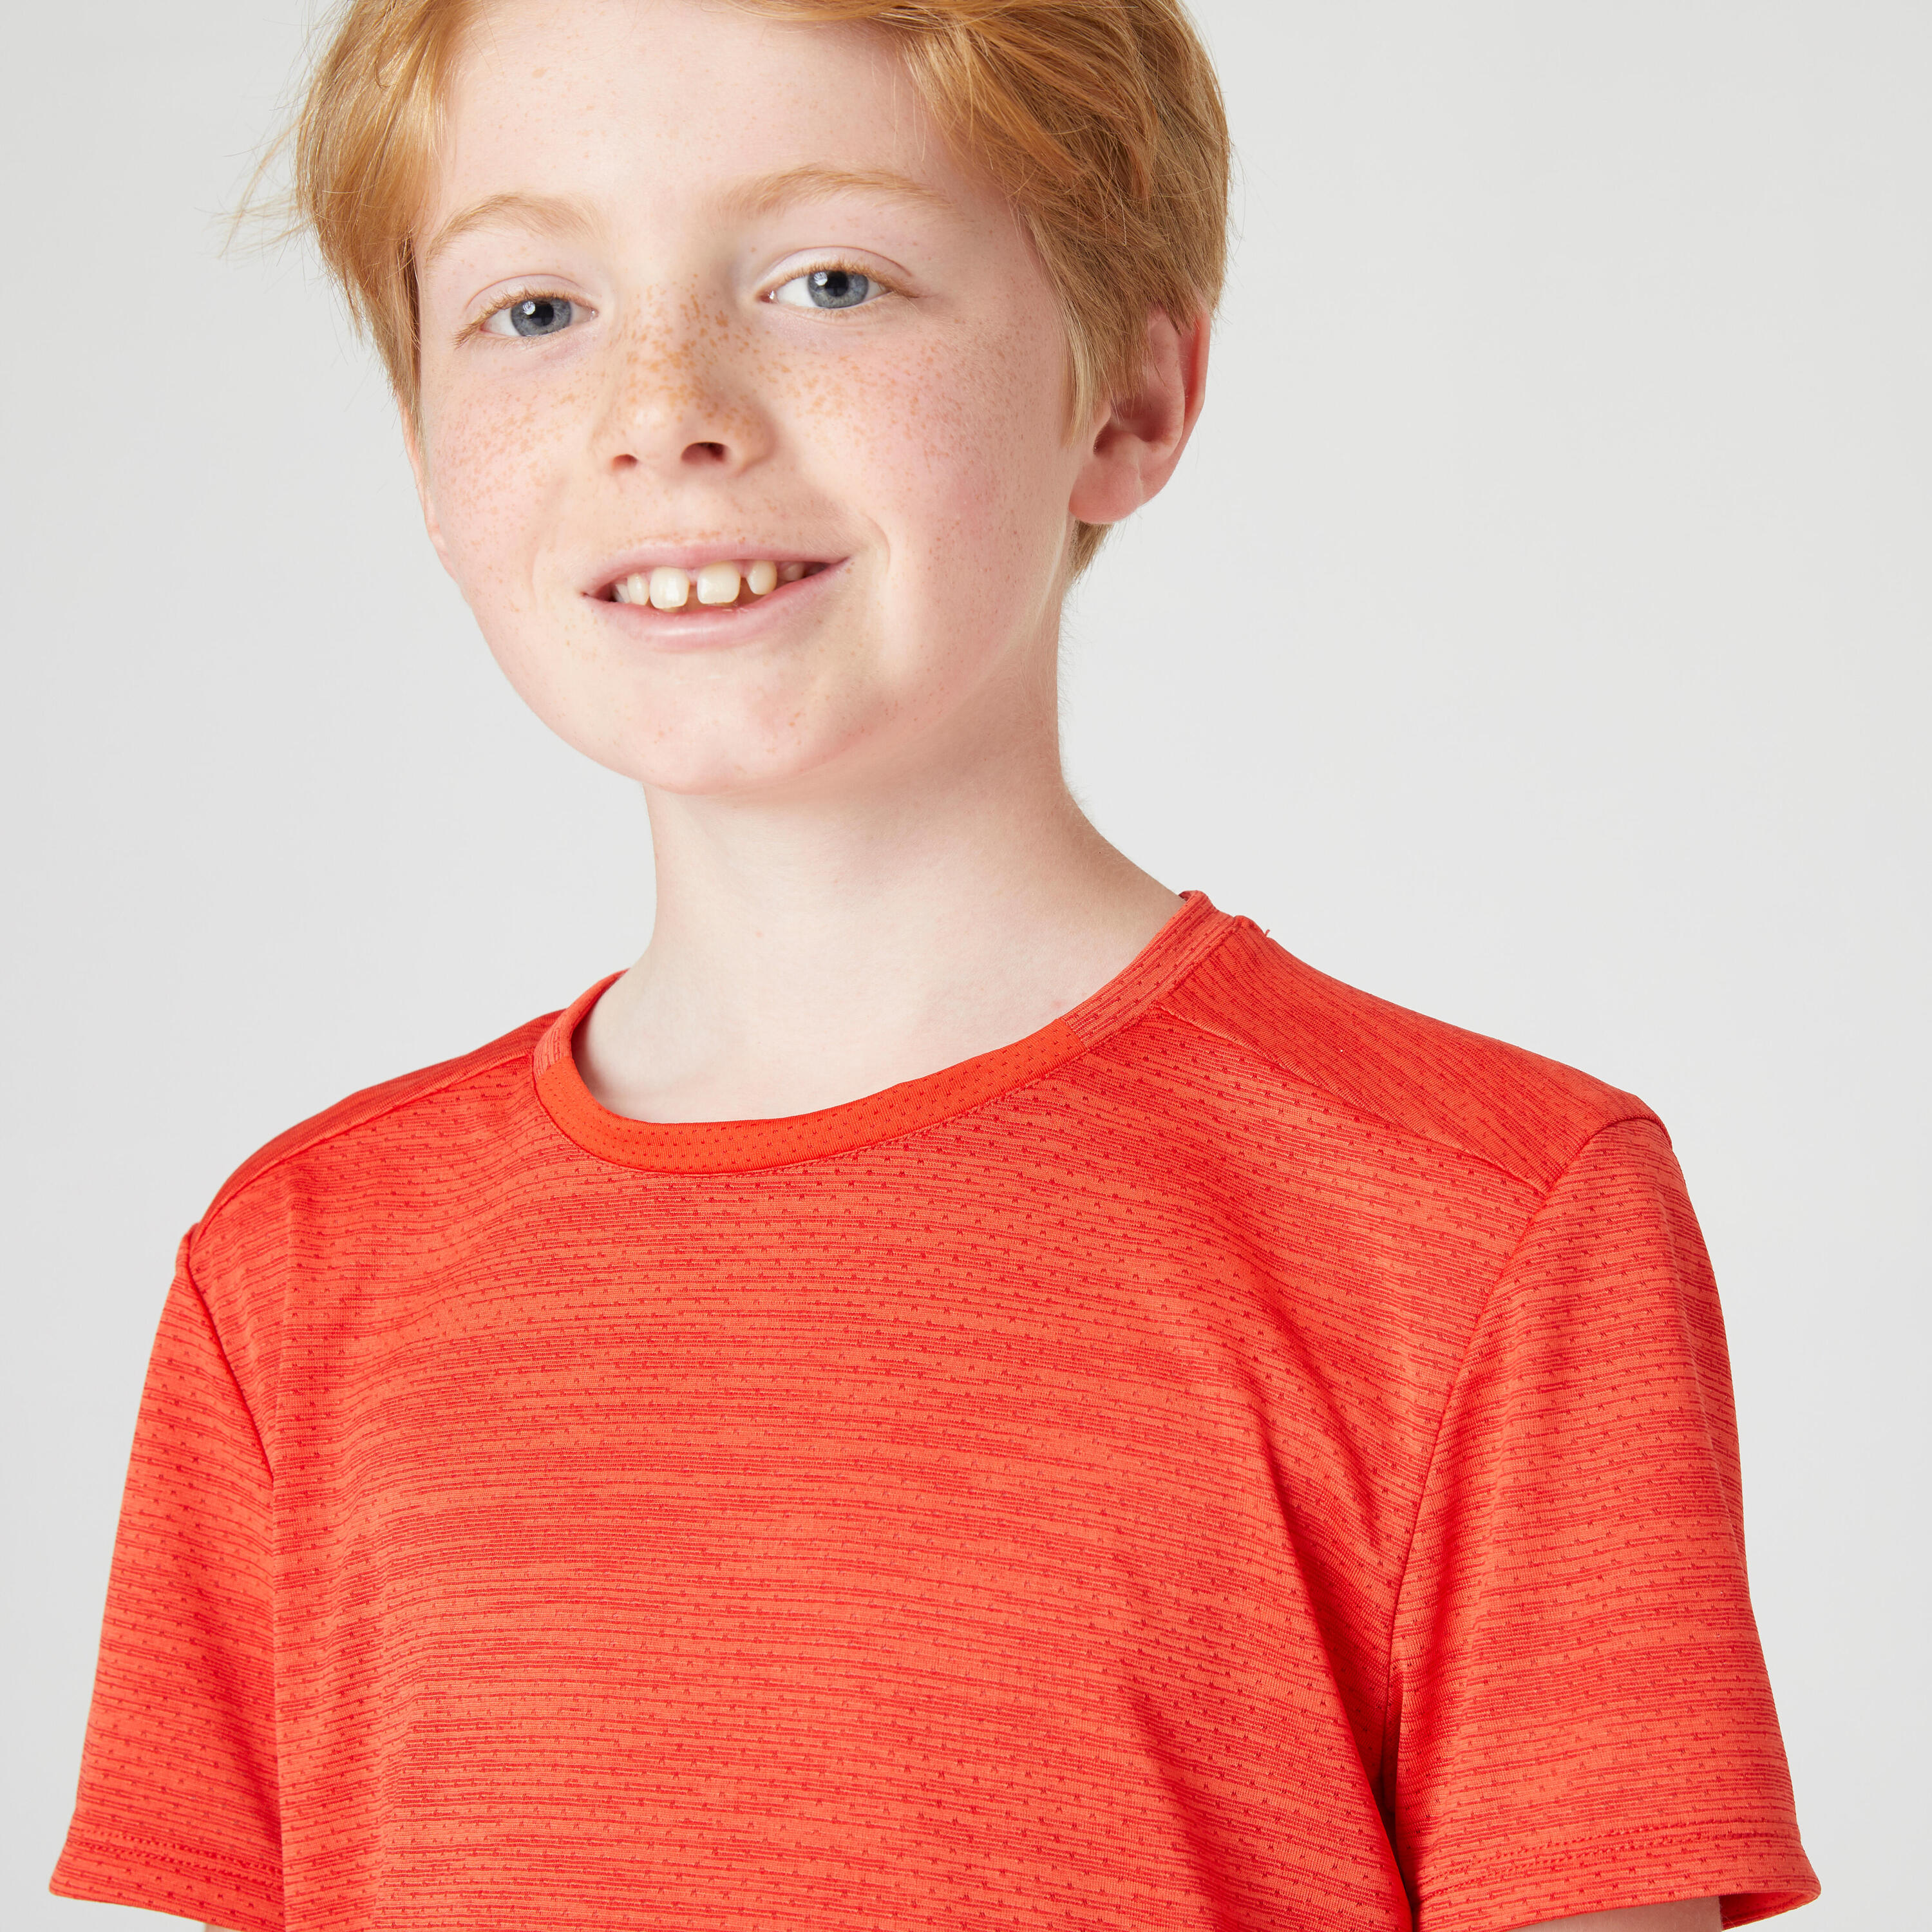 Kids' Synthetic Breathable T-Shirt S500 - Red 3/6